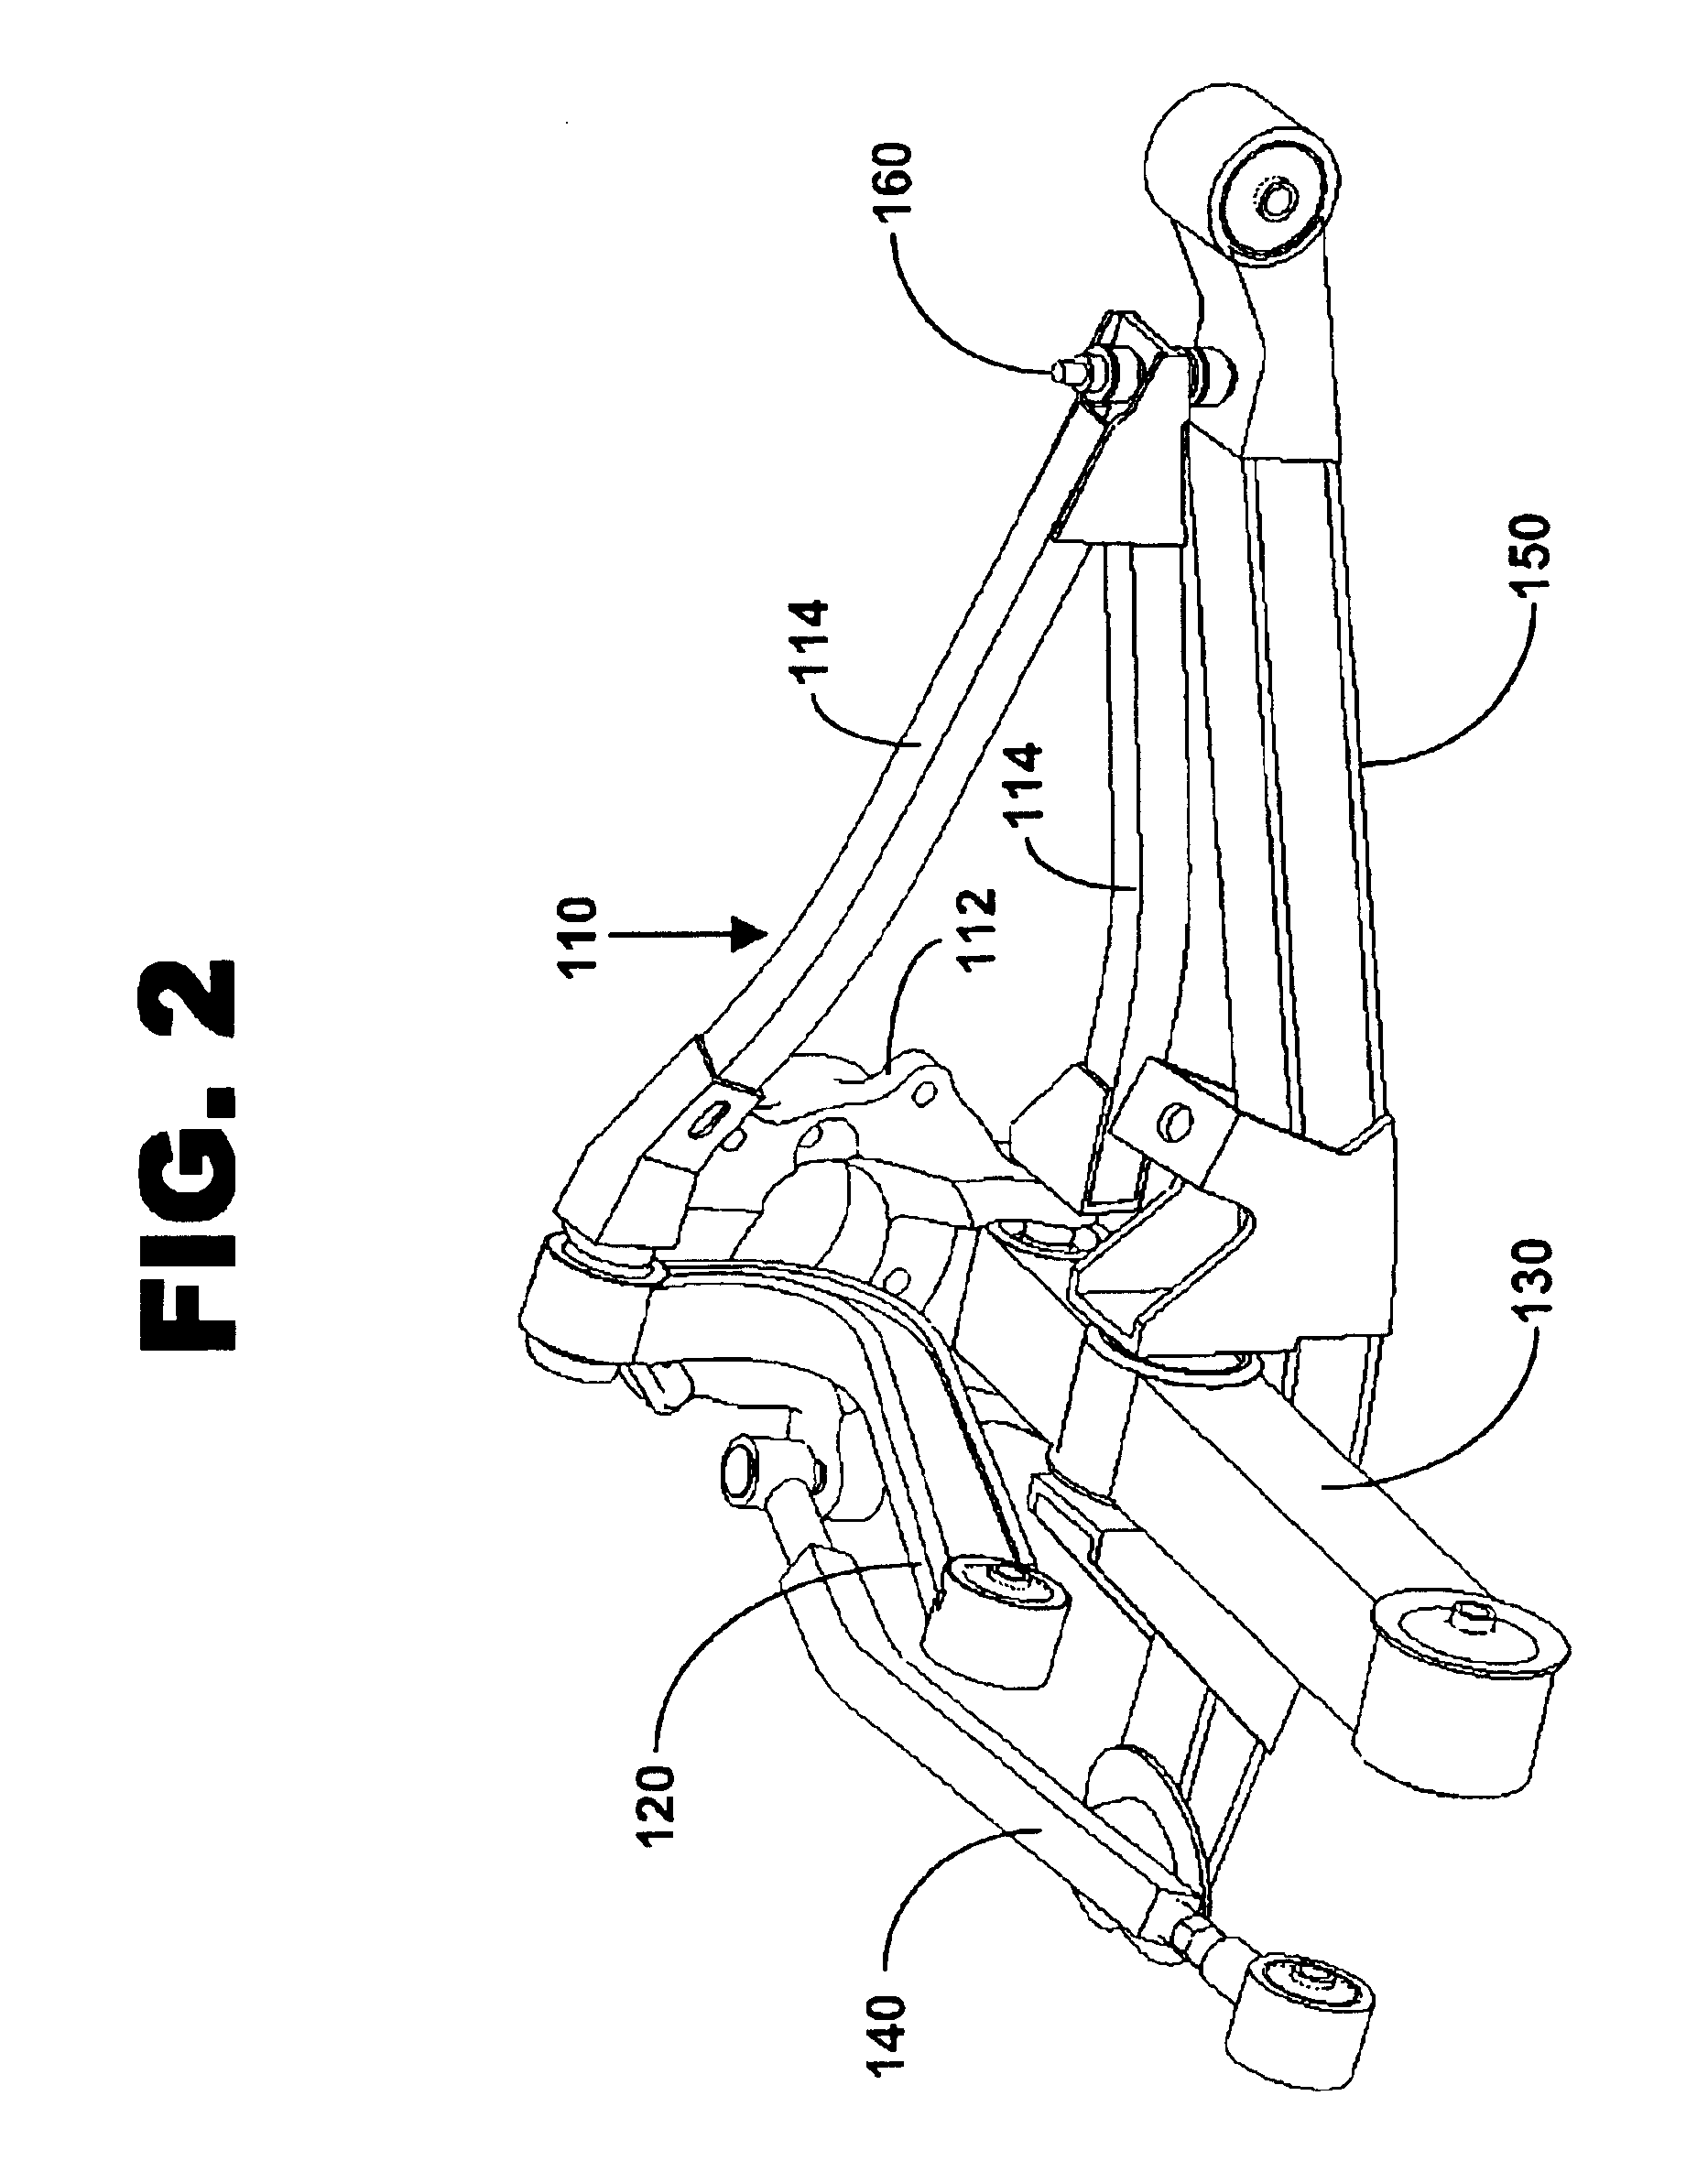 Multi-link independent rear suspension assembly